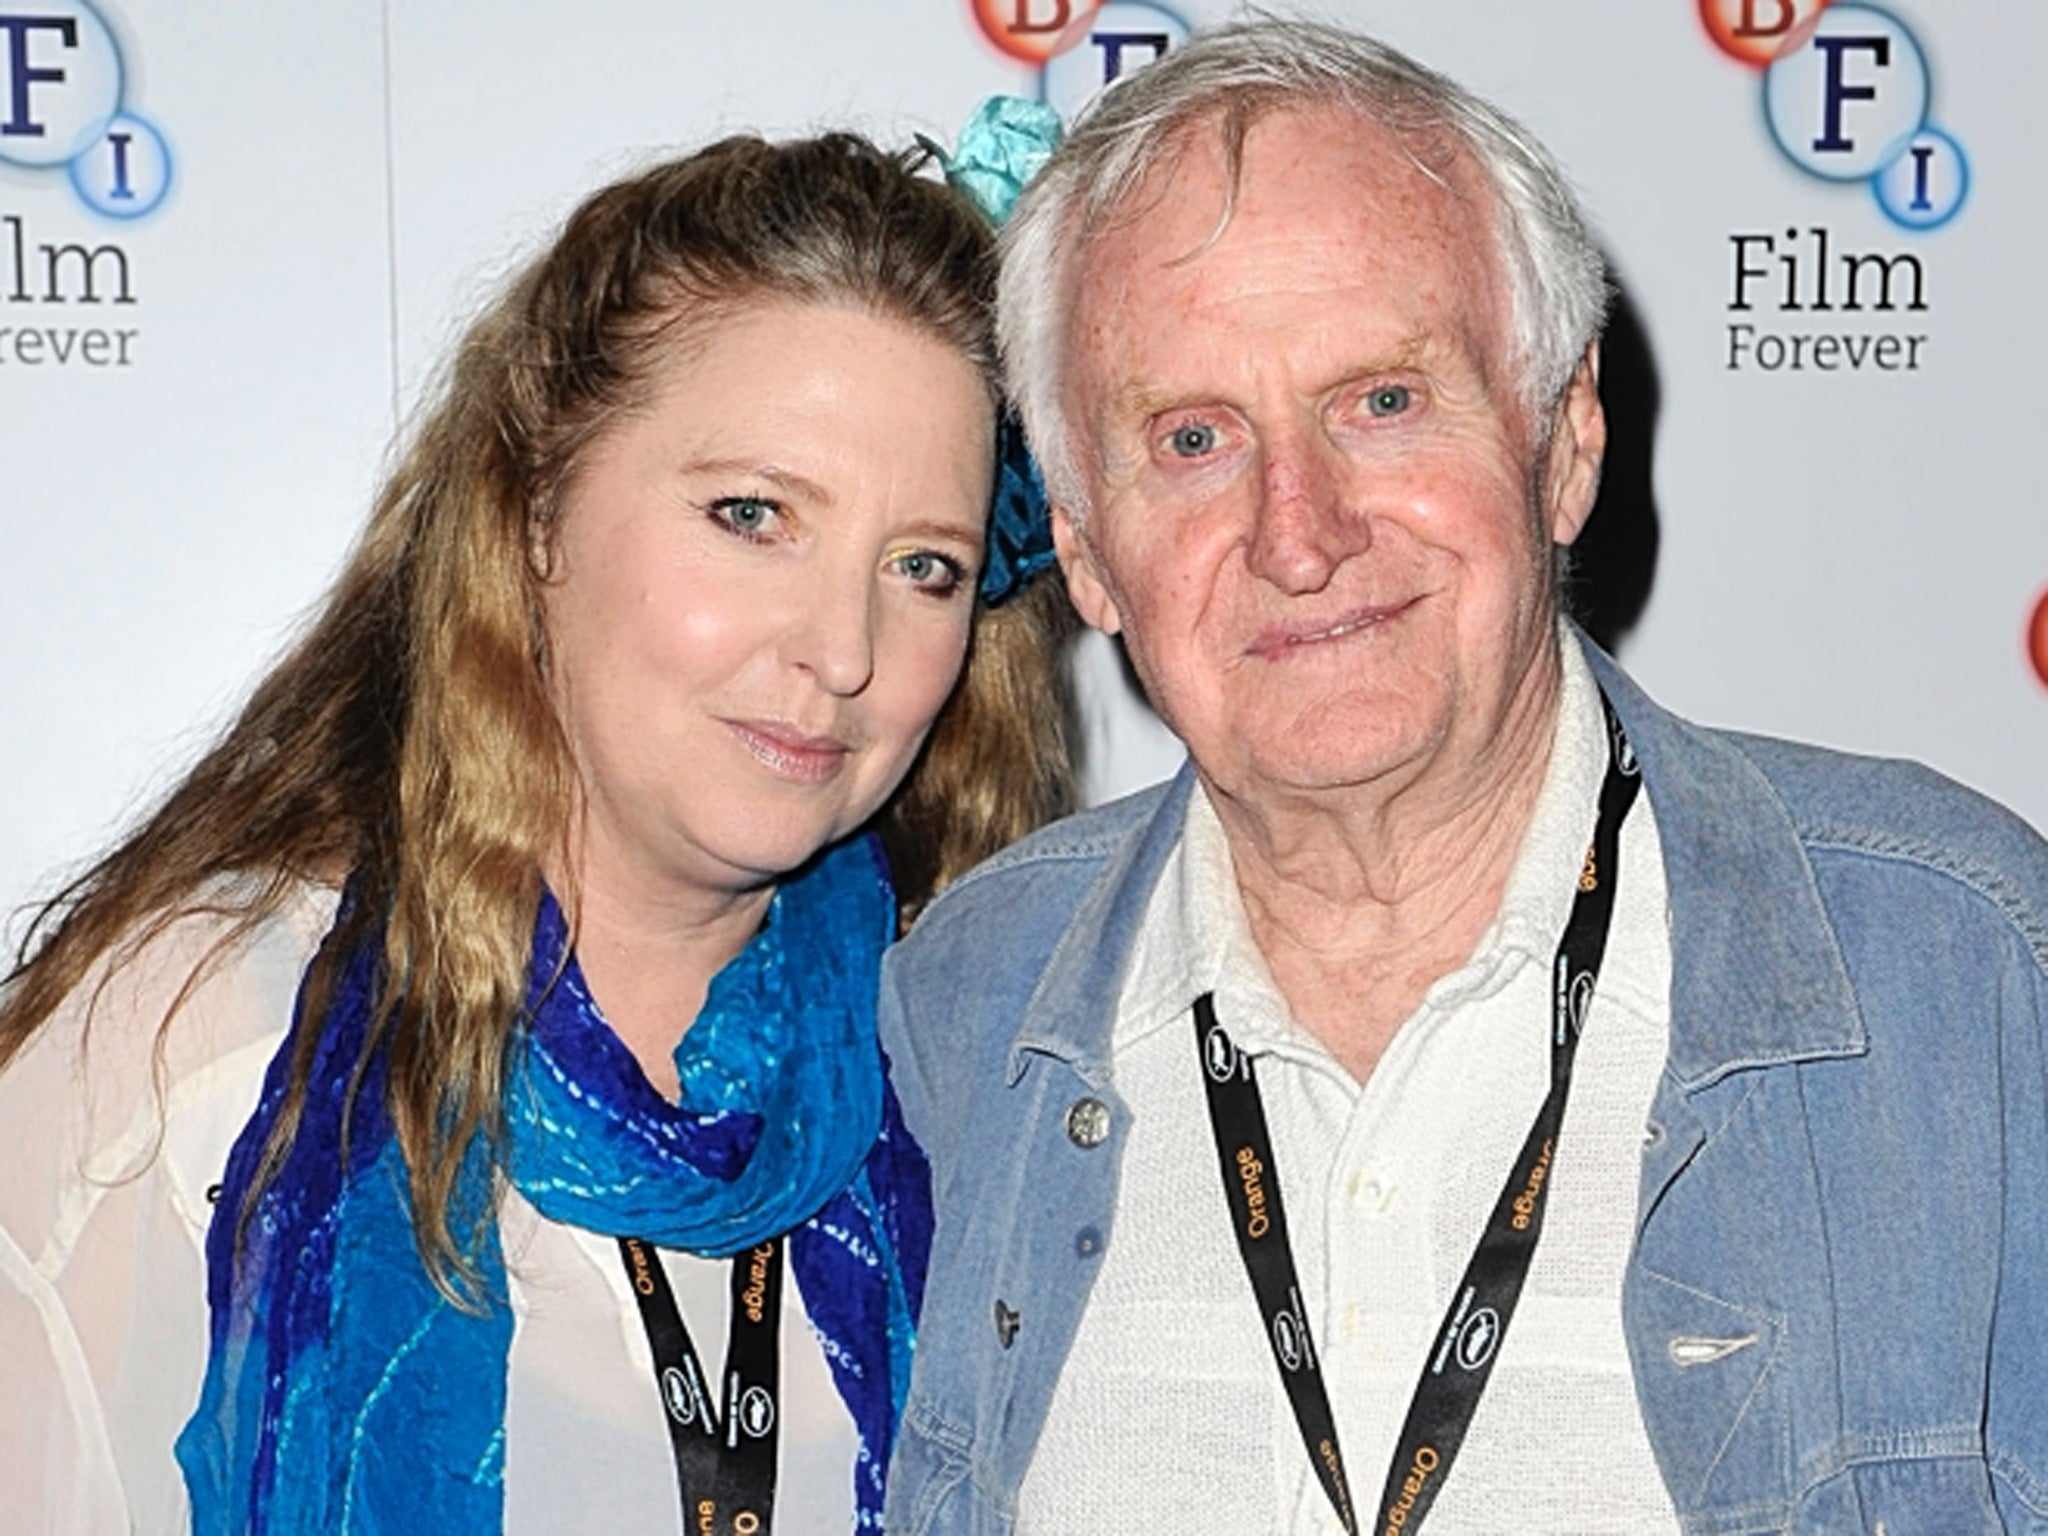 Reel world: Katrine Boorman and her father, John